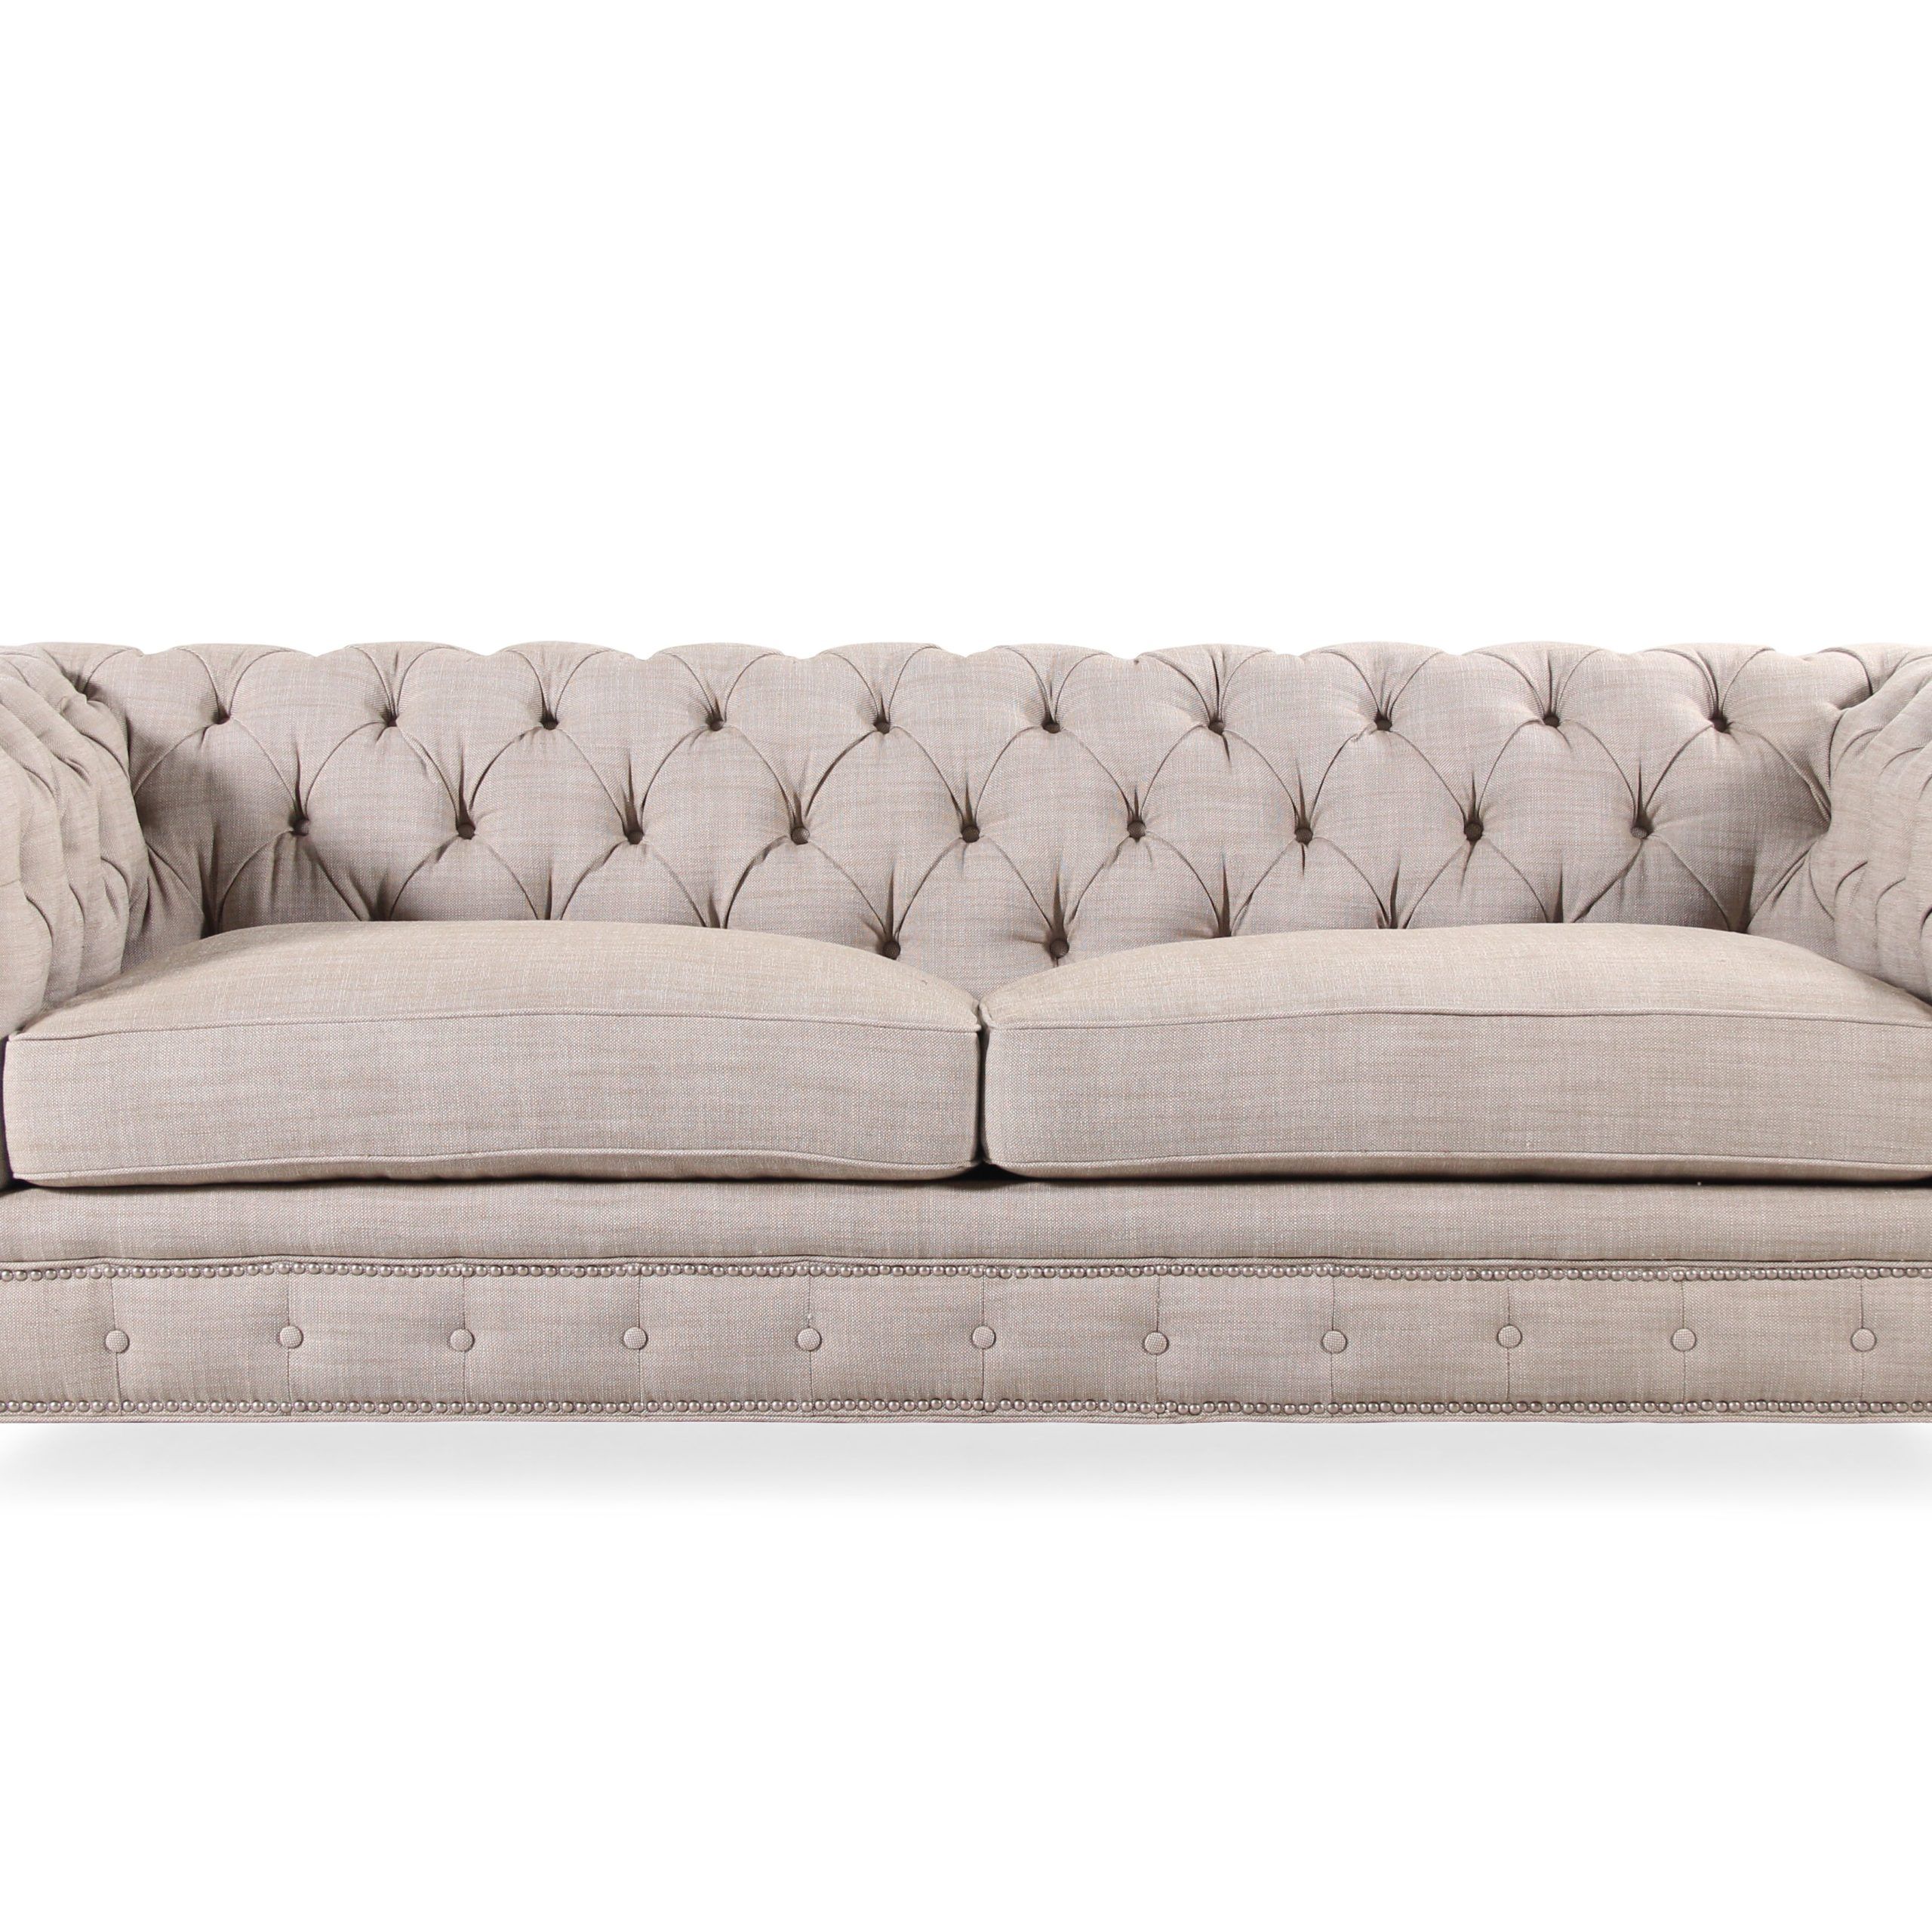 Traditional Button Tufted 102" Sofa In Cream | Mathis Brothers Furniture With Sofas In Cream (View 4 of 20)